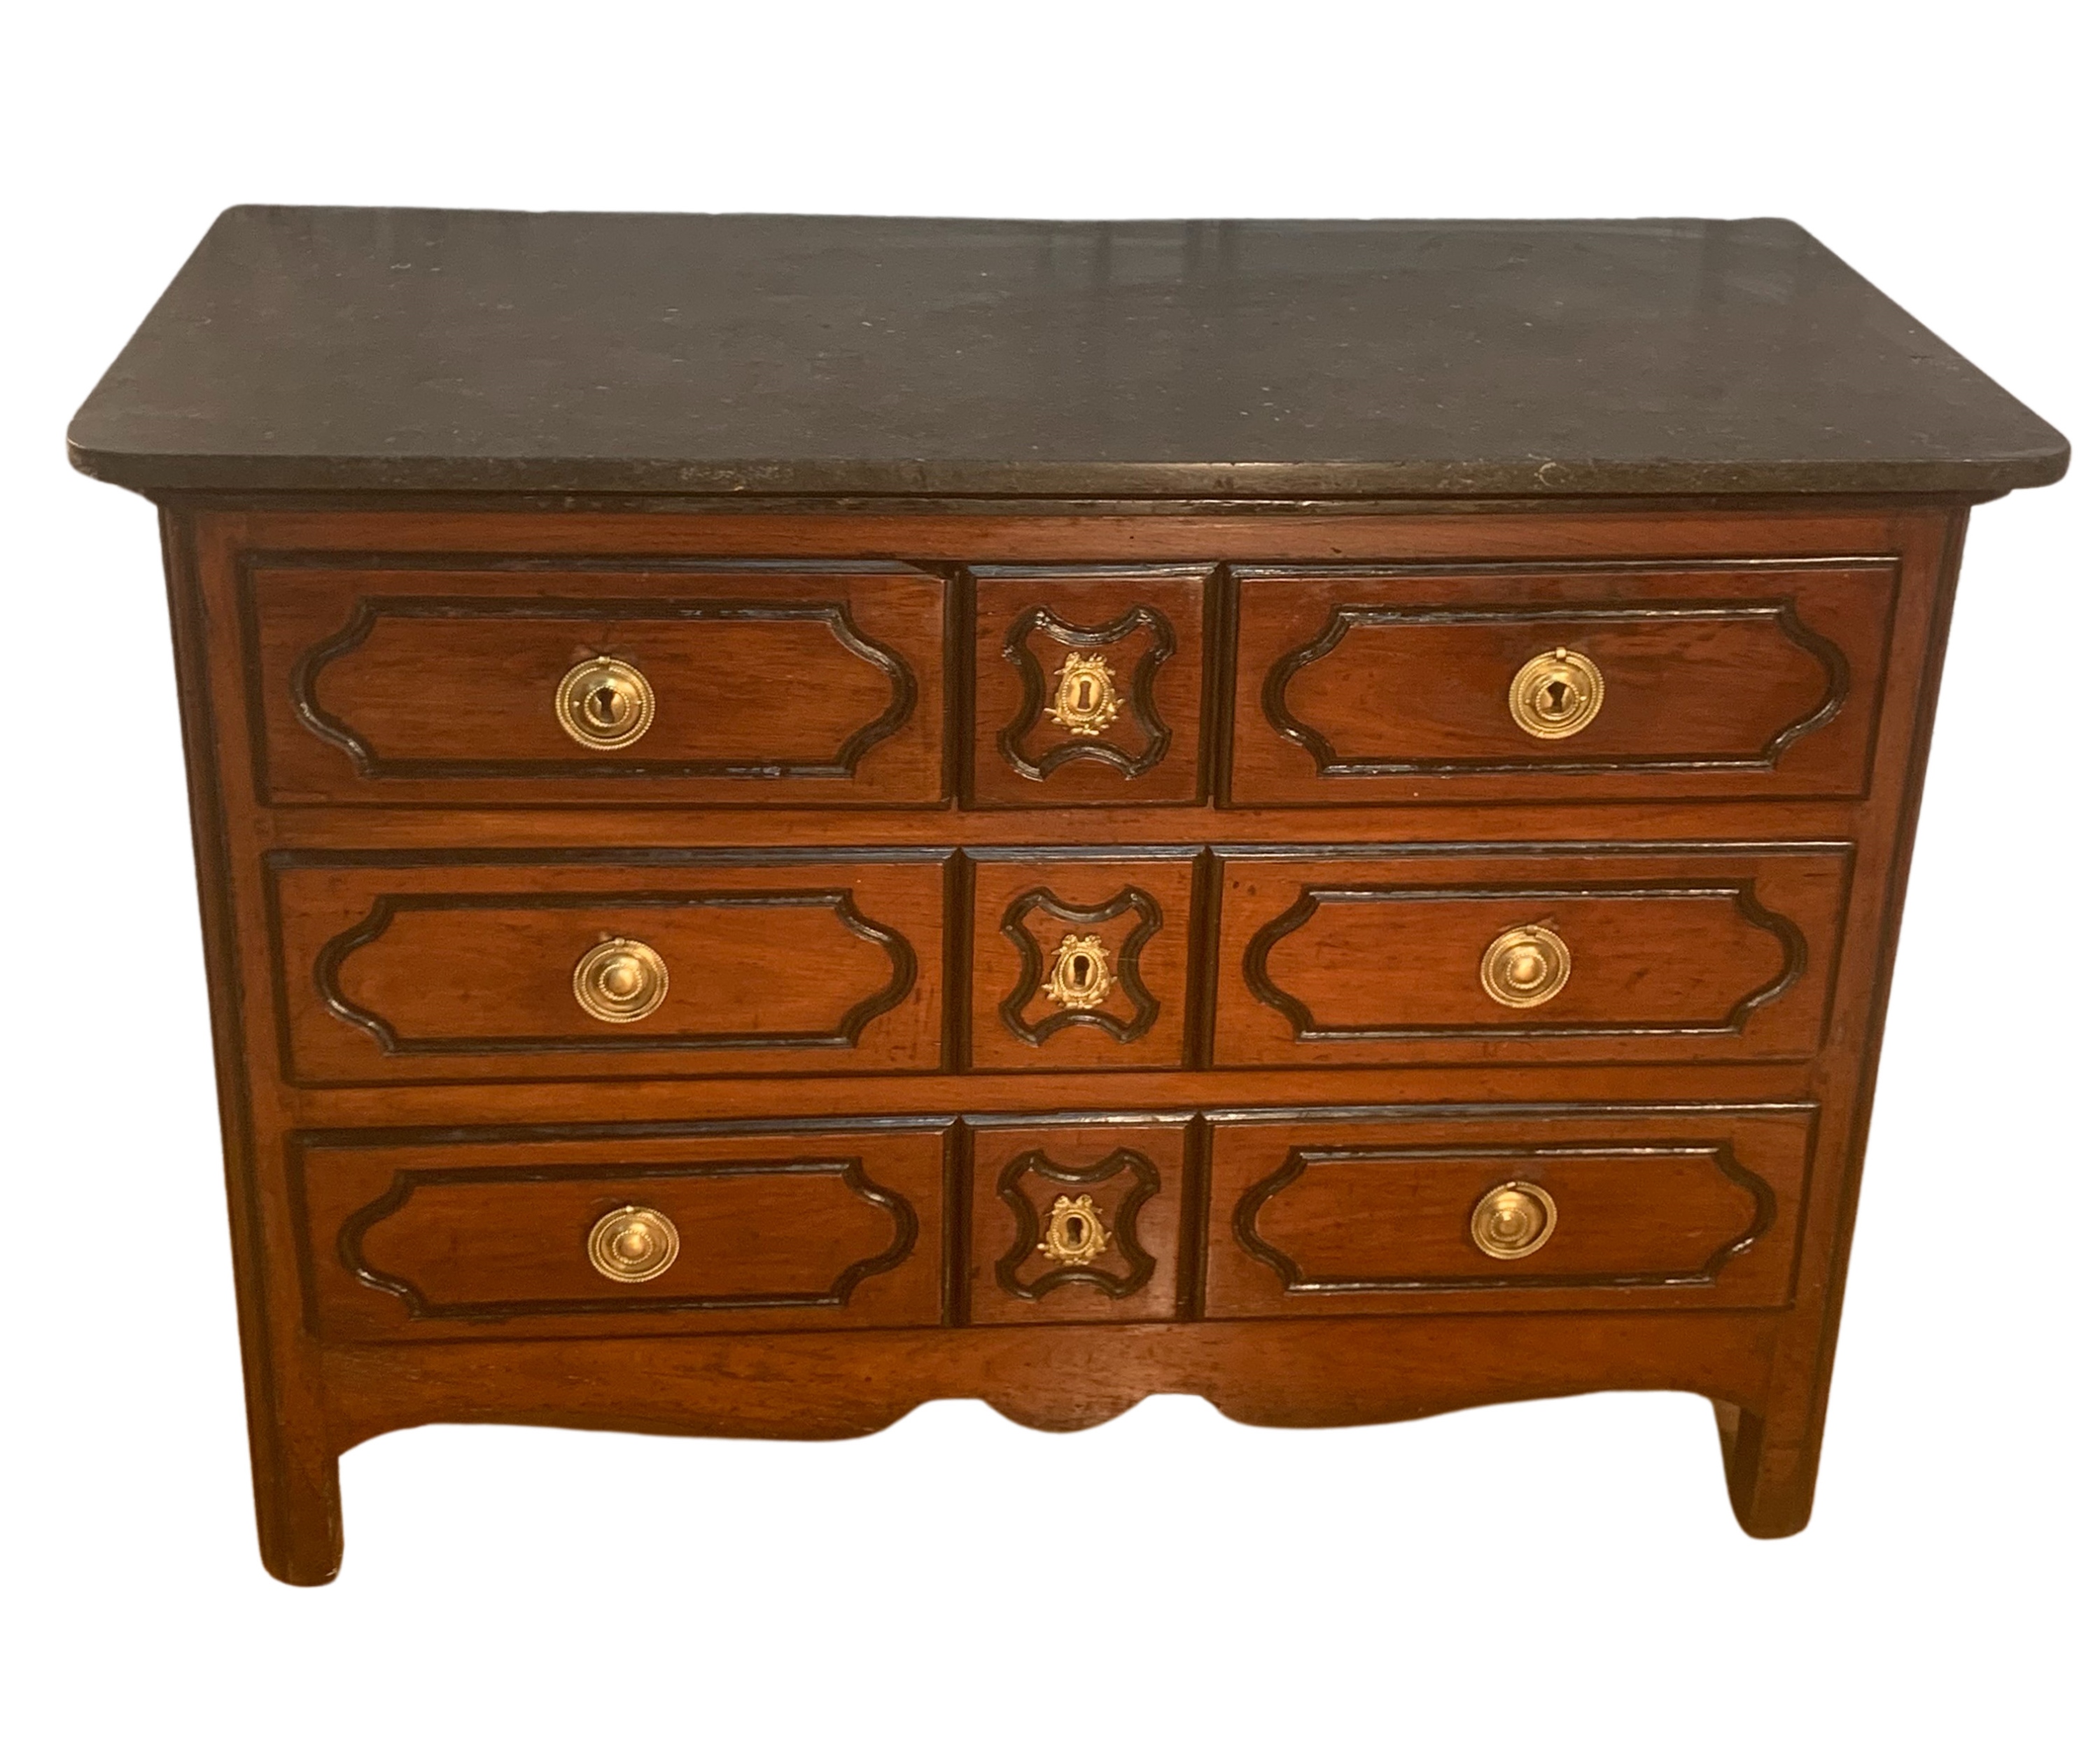 EARLY LOUIS XVI STYLE COMMODE Early 2f8b2c